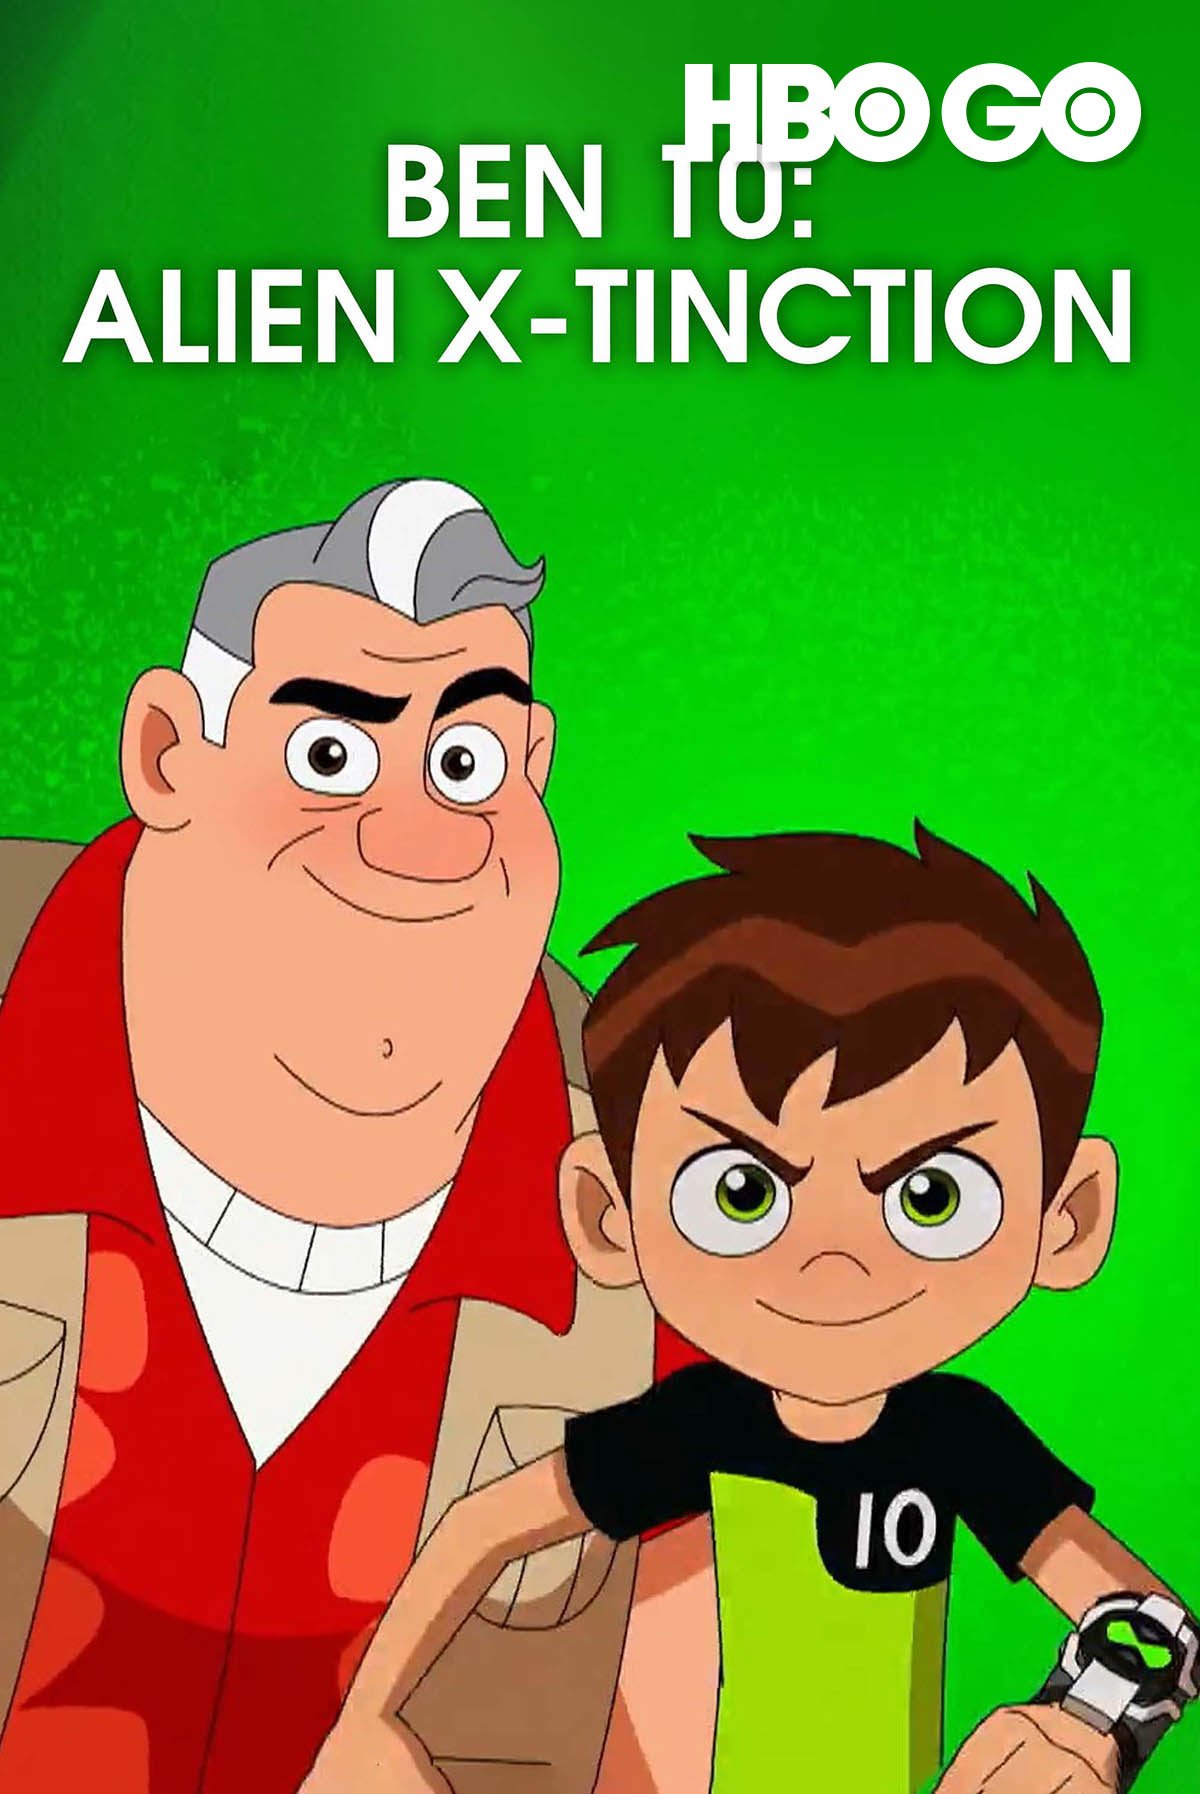 What changes would you make to Alien X-tinction? : r/Ben10